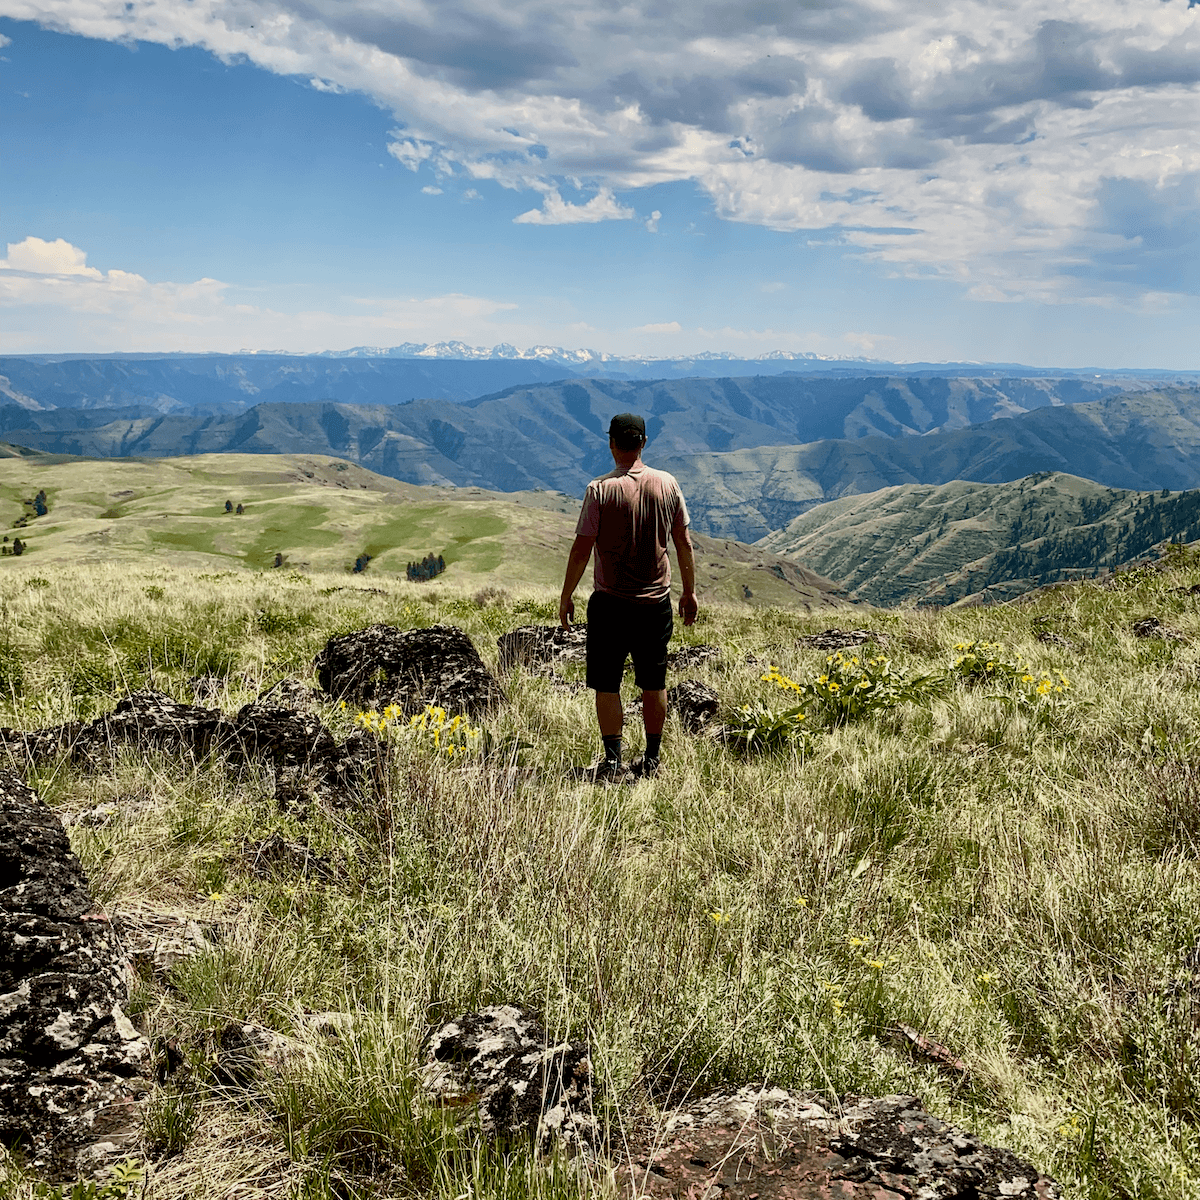 Matthew Kessi stands in his nature connection with a prairie that leads to dramatic green lined canyons toward mountains in the distance.